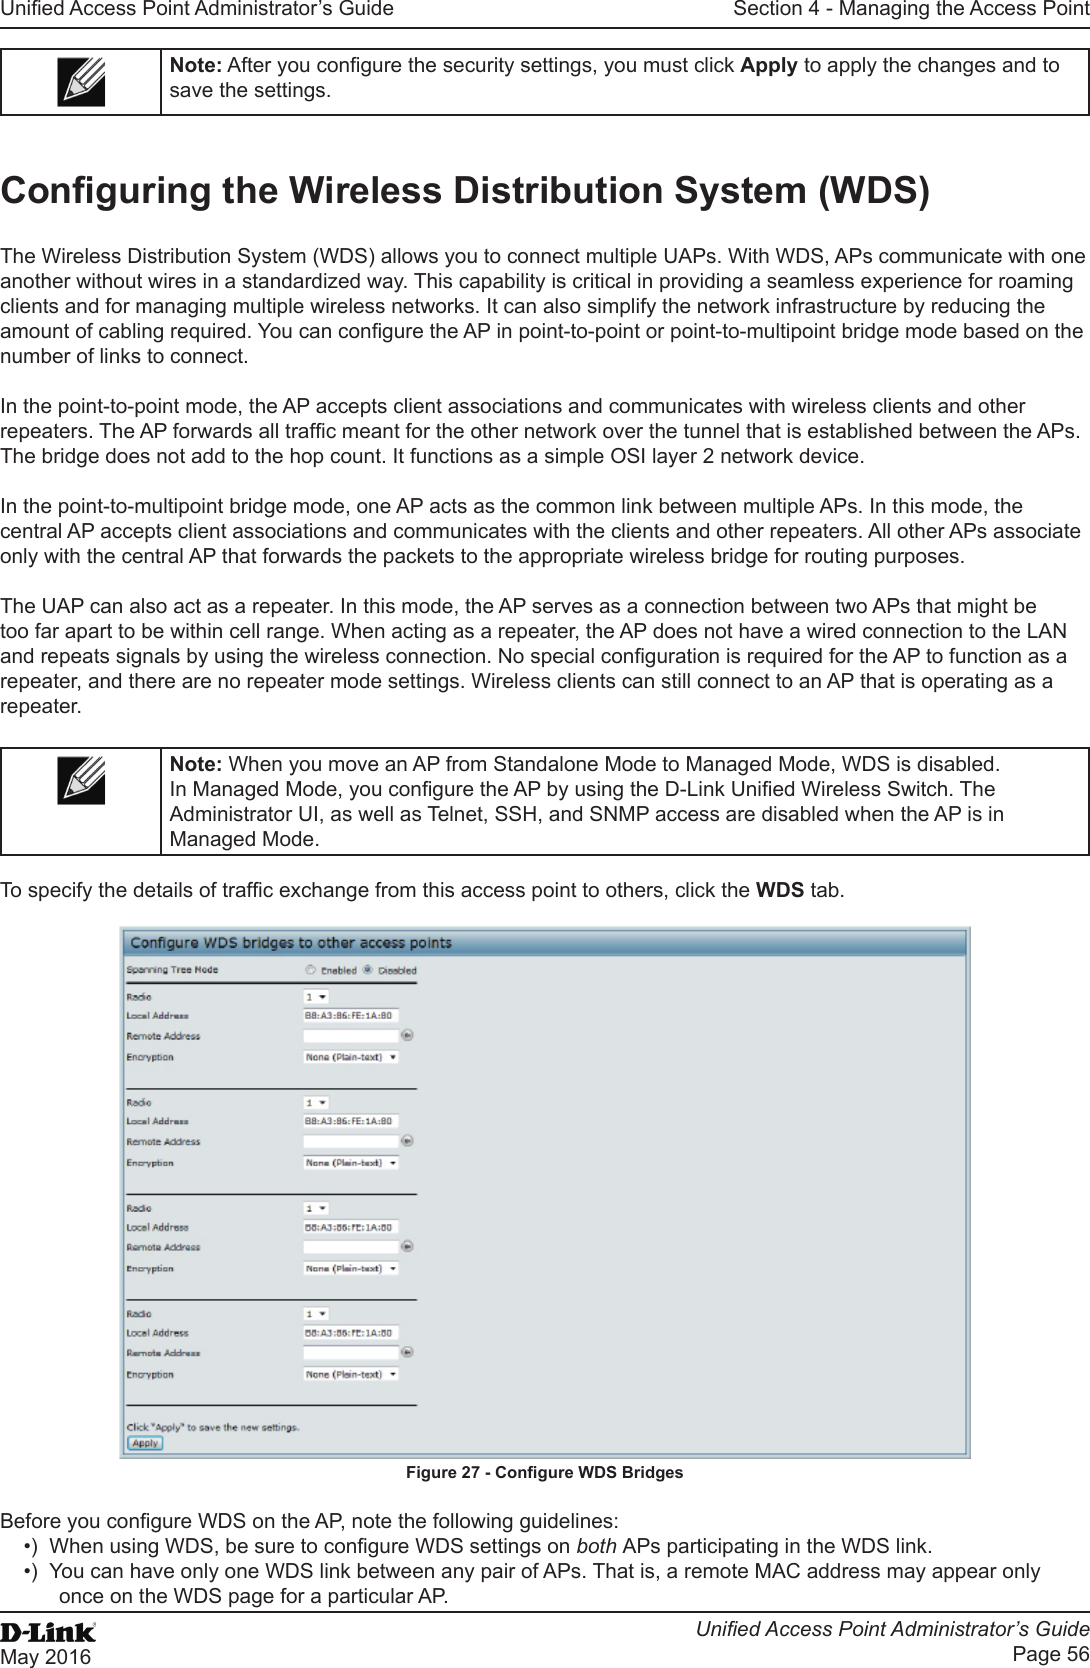 Unied Access Point Administrator’s GuideUnied Access Point Administrator’s GuidePage 56May 2016Section 4 - Managing the Access PointNote: After you congure the security settings, you must click Apply to apply the changes and to save the settings.Conguring the Wireless Distribution System (WDS)The Wireless Distribution System (WDS) allows you to connect multiple UAPs. With WDS, APs communicate with one another without wires in a standardized way. This capability is critical in providing a seamless experience for roaming clients and for managing multiple wireless networks. It can also simplify the network infrastructure by reducing the amount of cabling required. You can congure the AP in point-to-point or point-to-multipoint bridge mode based on the number of links to connect.In the point-to-point mode, the AP accepts client associations and communicates with wireless clients and other repeaters. The AP forwards all trafc meant for the other network over the tunnel that is established between the APs. The bridge does not add to the hop count. It functions as a simple OSI layer 2 network device.In the point-to-multipoint bridge mode, one AP acts as the common link between multiple APs. In this mode, the central AP accepts client associations and communicates with the clients and other repeaters. All other APs associate only with the central AP that forwards the packets to the appropriate wireless bridge for routing purposes.The UAP can also act as a repeater. In this mode, the AP serves as a connection between two APs that might be too far apart to be within cell range. When acting as a repeater, the AP does not have a wired connection to the LAN and repeats signals by using the wireless connection. No special conguration is required for the AP to function as a repeater, and there are no repeater mode settings. Wireless clients can still connect to an AP that is operating as a repeater.Note: When you move an AP from Standalone Mode to Managed Mode, WDS is disabled. In Managed Mode, you congure the AP by using the D-Link Unied Wireless Switch. The Administrator UI, as well as Telnet, SSH, and SNMP access are disabled when the AP is in Managed Mode.To specify the details of trafc exchange from this access point to others, click the WDS tab.Figure 27 - Congure WDS BridgesBefore you congure WDS on the AP, note the following guidelines:•)  When using WDS, be sure to congure WDS settings on both APs participating in the WDS link.•)  You can have only one WDS link between any pair of APs. That is, a remote MAC address may appear only once on the WDS page for a particular AP.